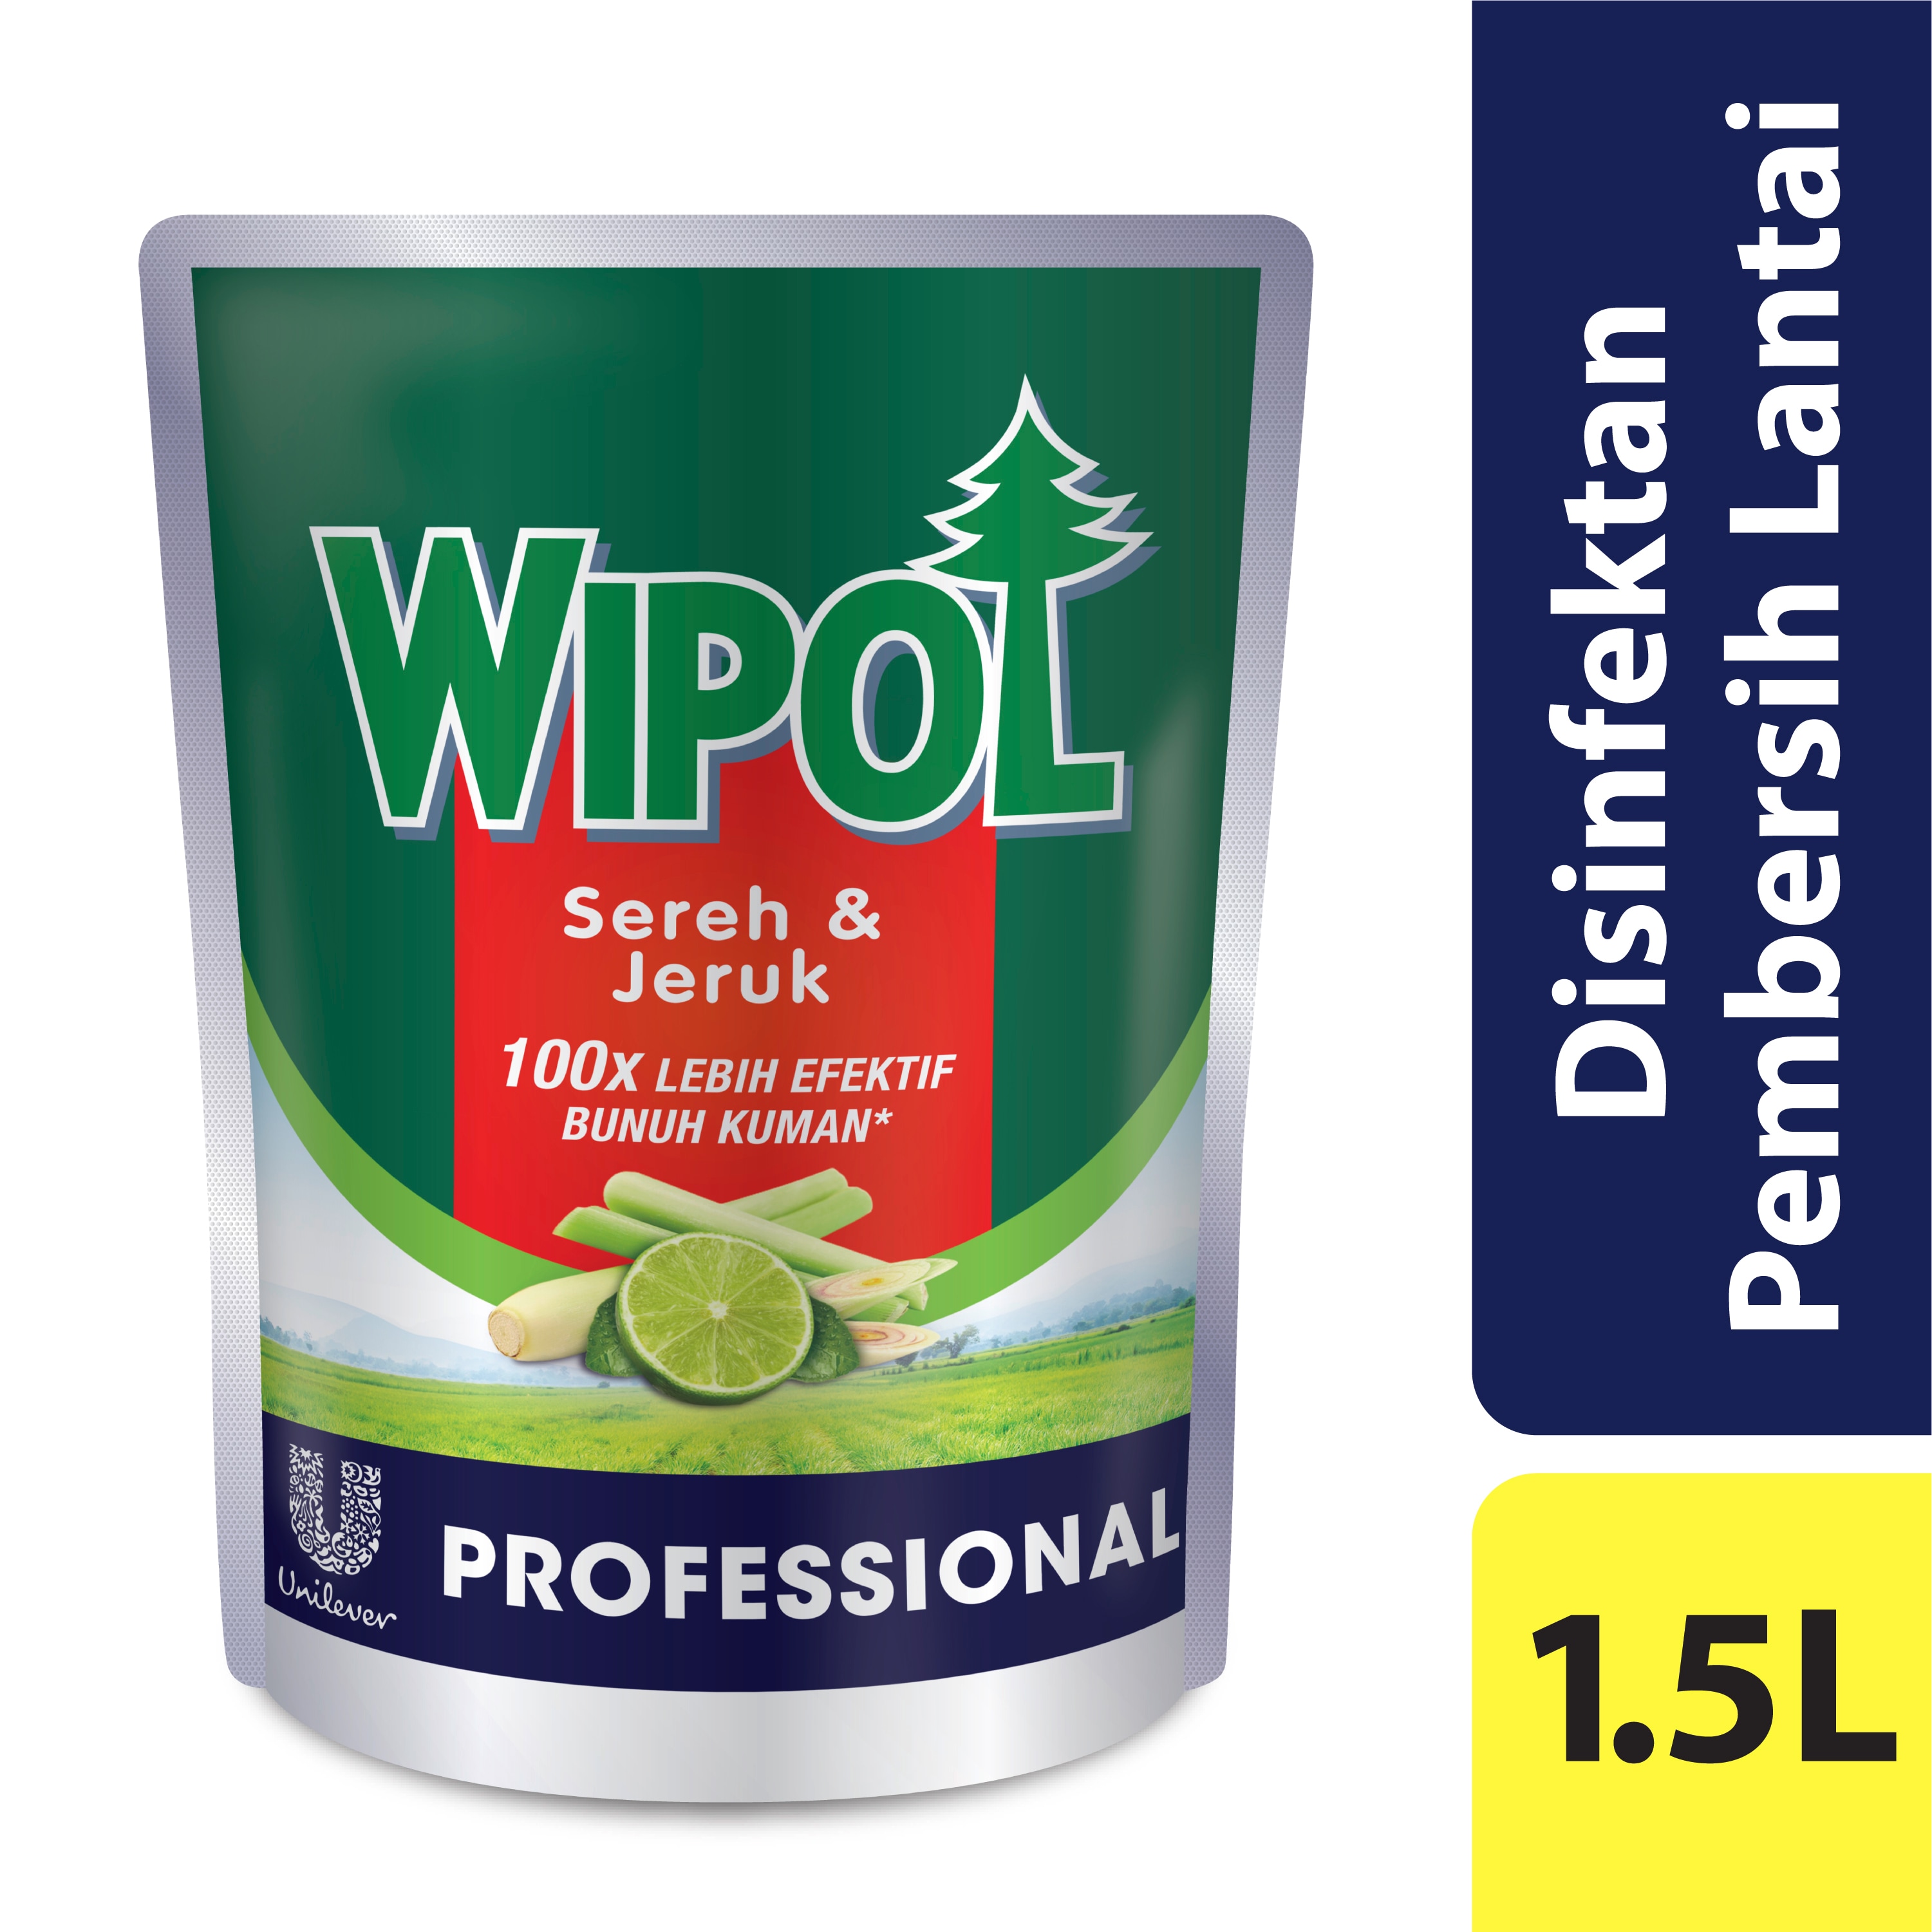 Wipol Professional Classic Pine 1.5L - Removes Stains, Malodor, and Kills Bacteria on The Floor.